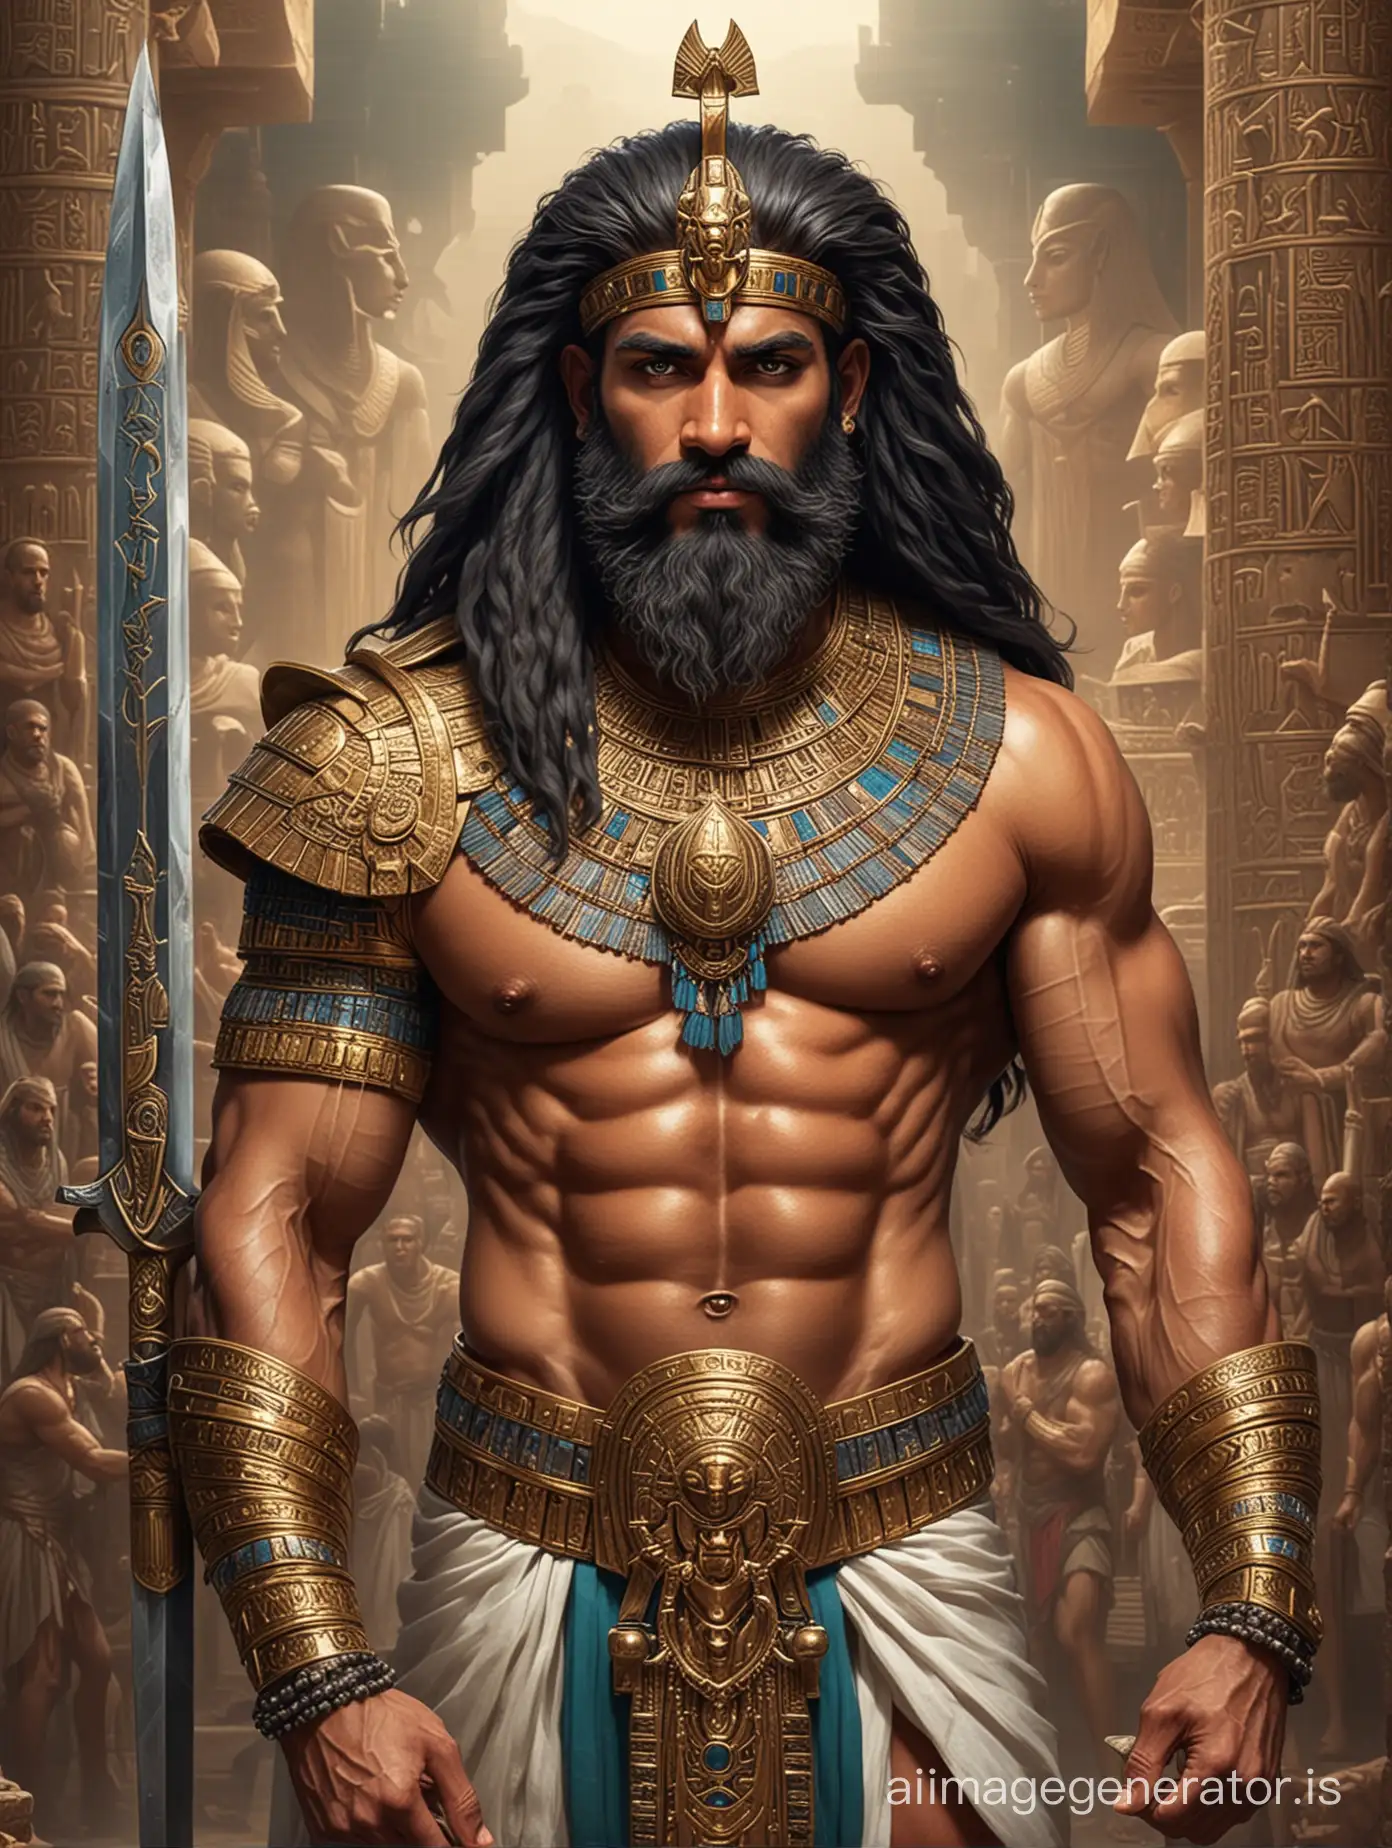 Ancient-Egyptian-Bodybuilder-King-with-Jewelry-and-Sword-in-Front-of-Majestic-Temple